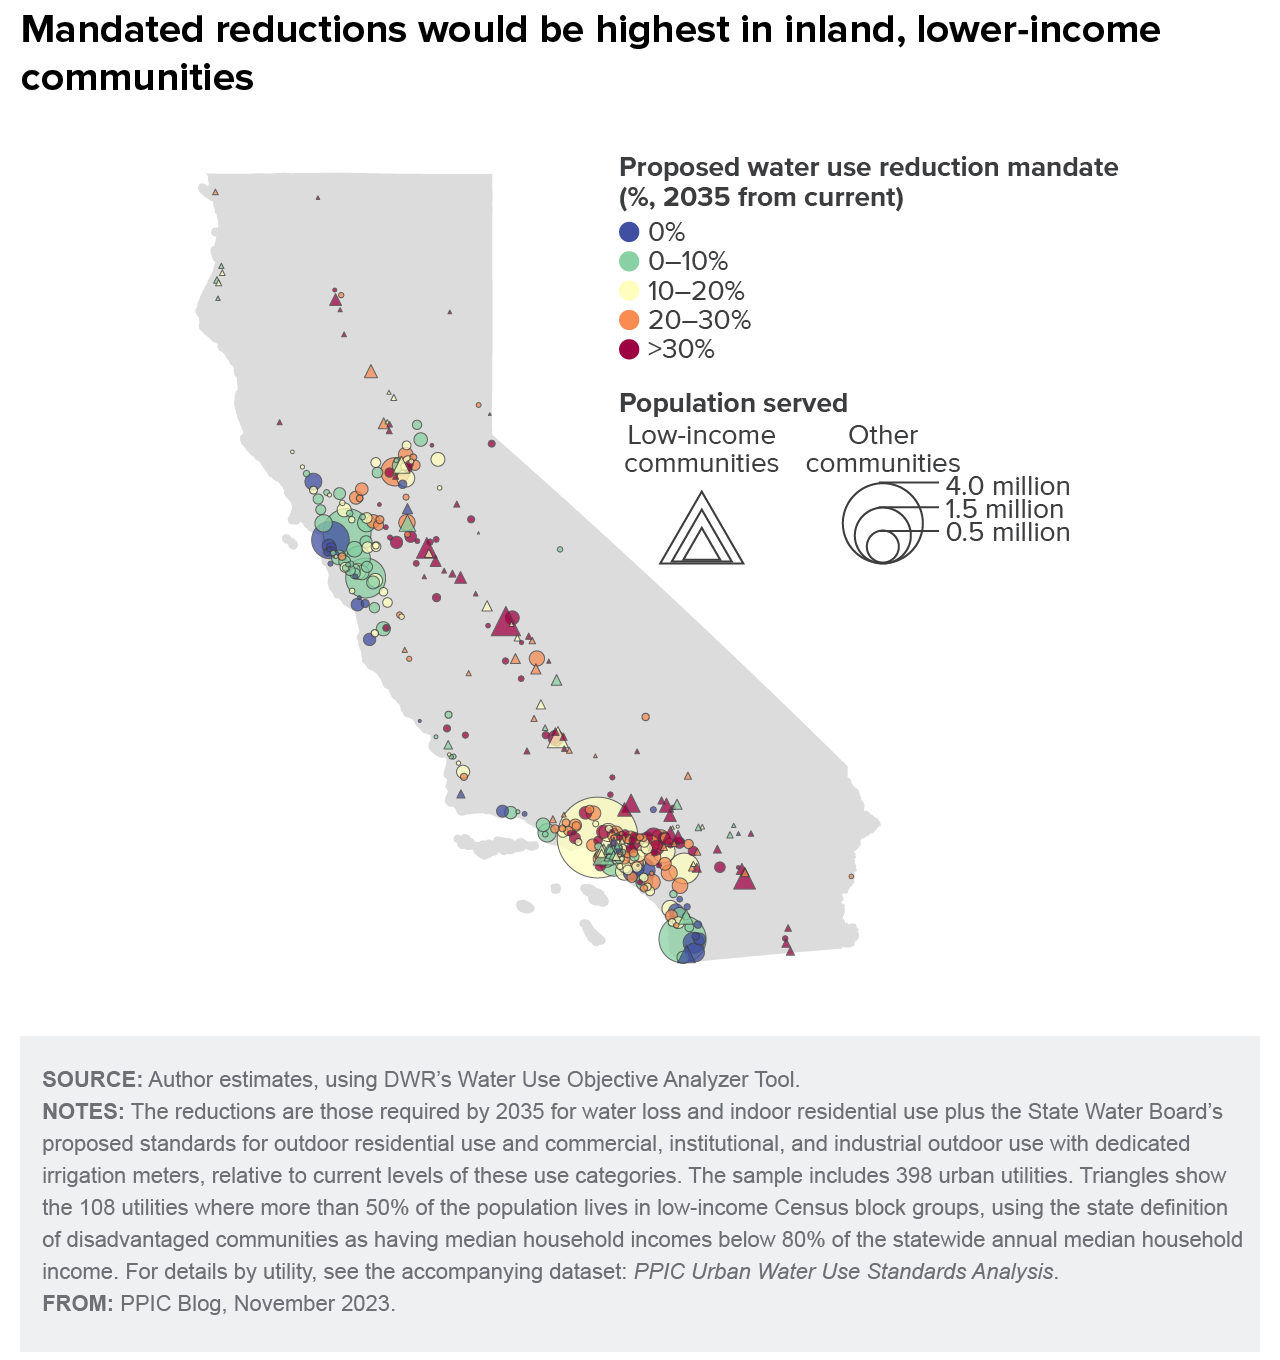 map - Mandated reductions would be highest in inland, lower-income communities